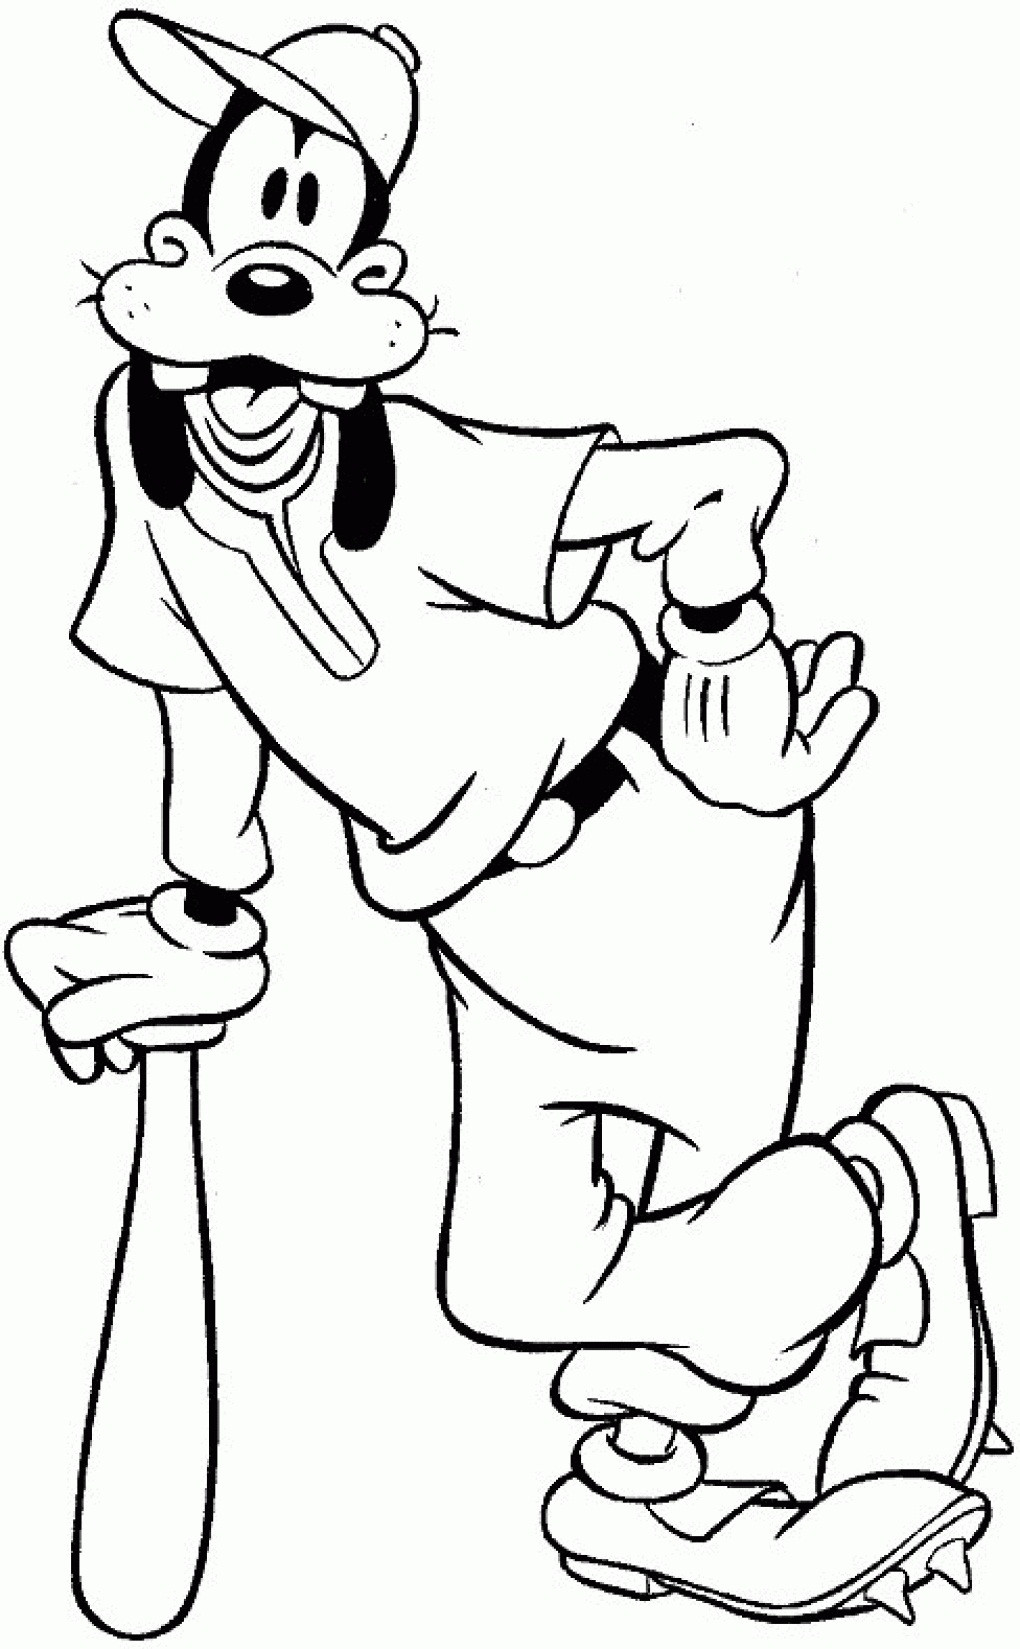 Coloring Pages For Kids To Print
 Free Printable Goofy Coloring Pages For Kids